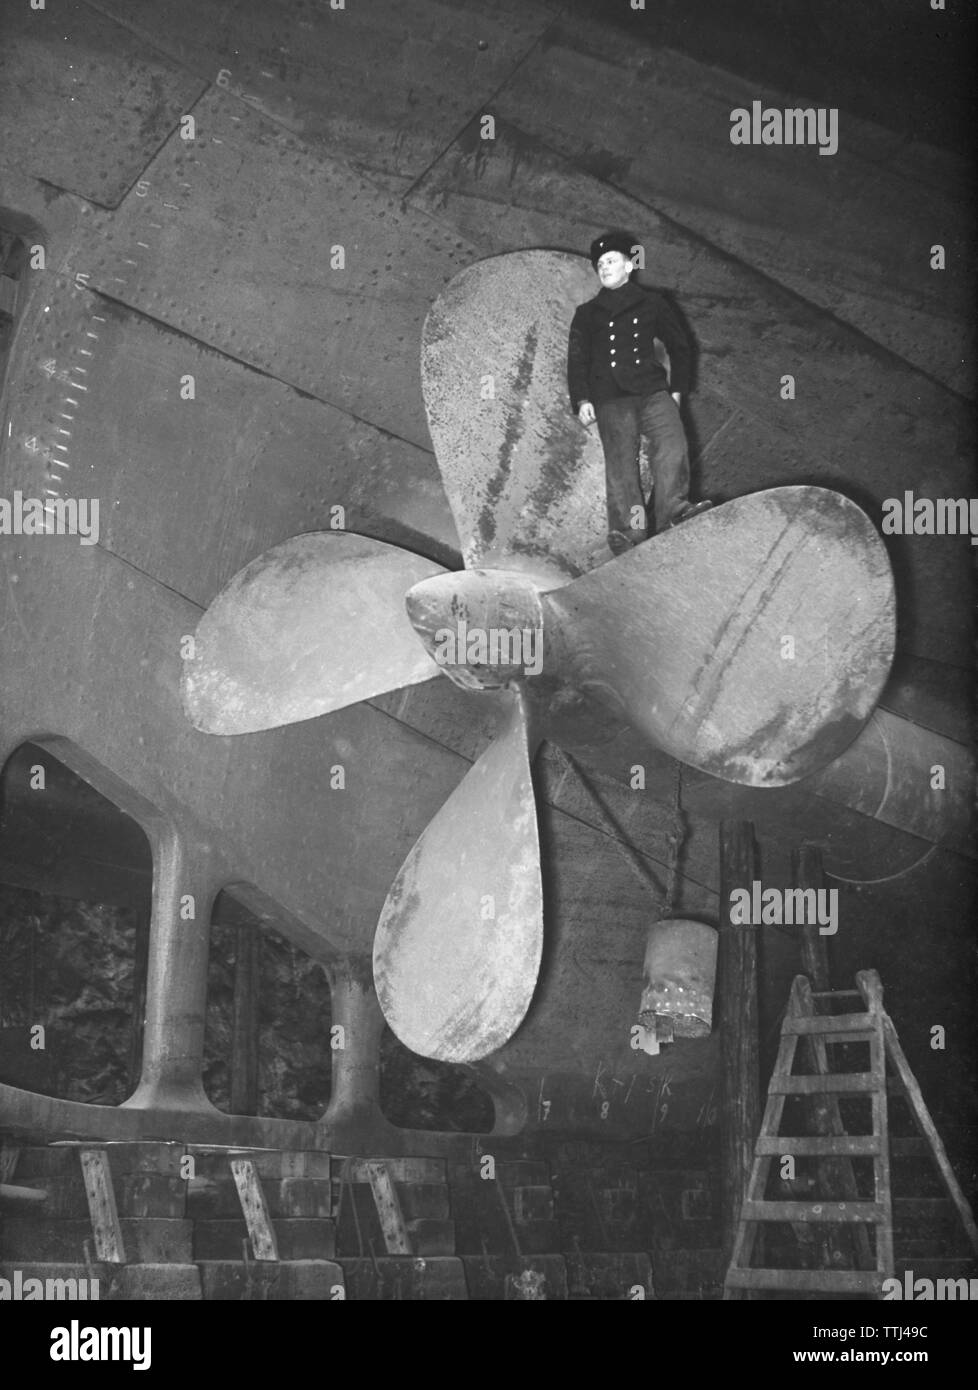 Dockyard in the 1940s. The icebreaker Ymer is being serviced at a wharf and a man is standing on the stern propeller. Sweden 1941. Kristoffersson ref 172-8 Stock Photo